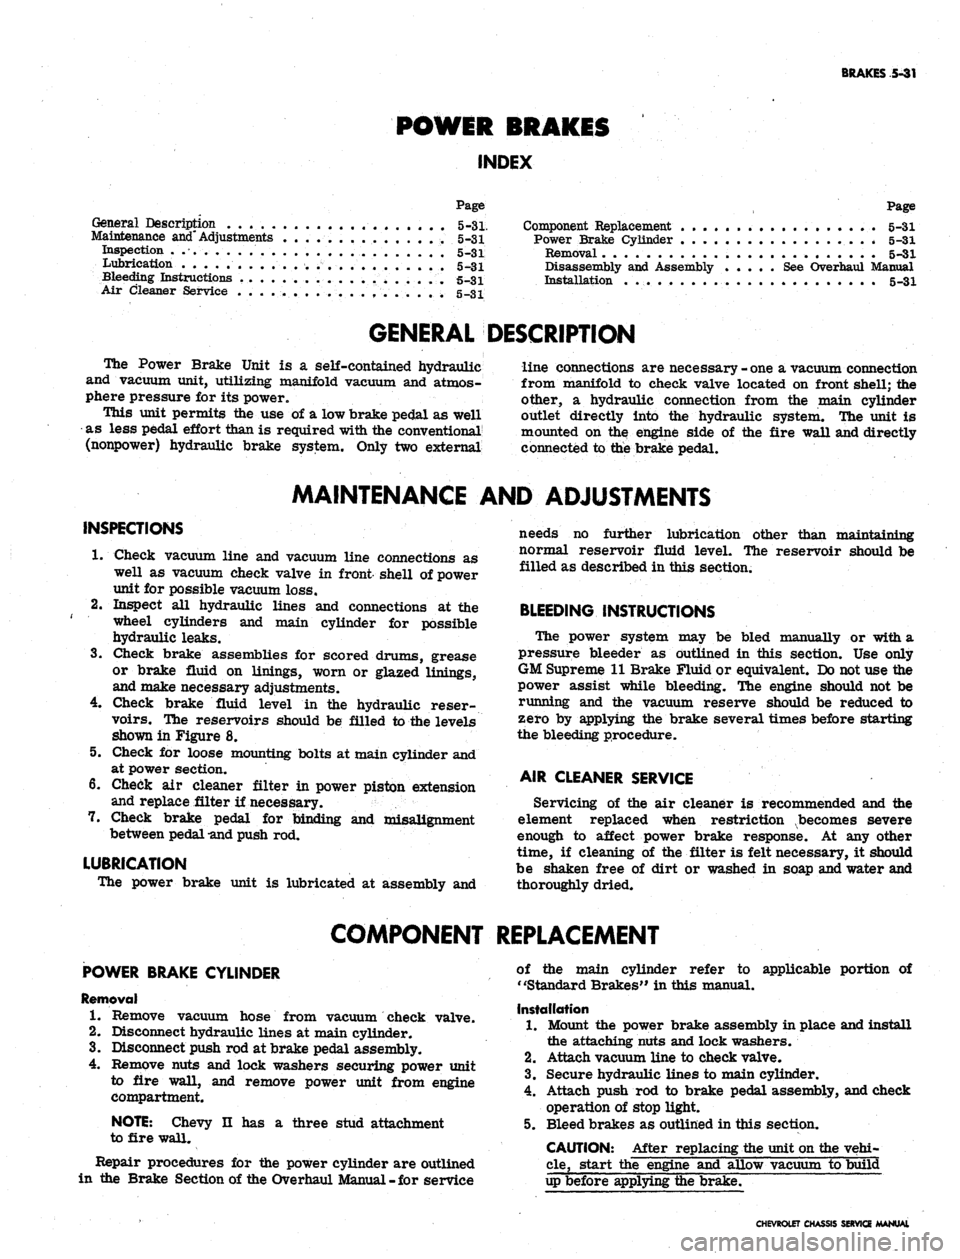 CHEVROLET CAMARO 1967 1.G Chassis Repair Manual 
BRAKES
 5-31

POWER BRAKES

INDEX

General Description 5-31

Maintenance
 and"
 Adjustments 5-31

Inspection . ... 5_31

Lubrication 5-31

Bleeding Instructions . . . 5.31

Air Cleaner Service . . . 